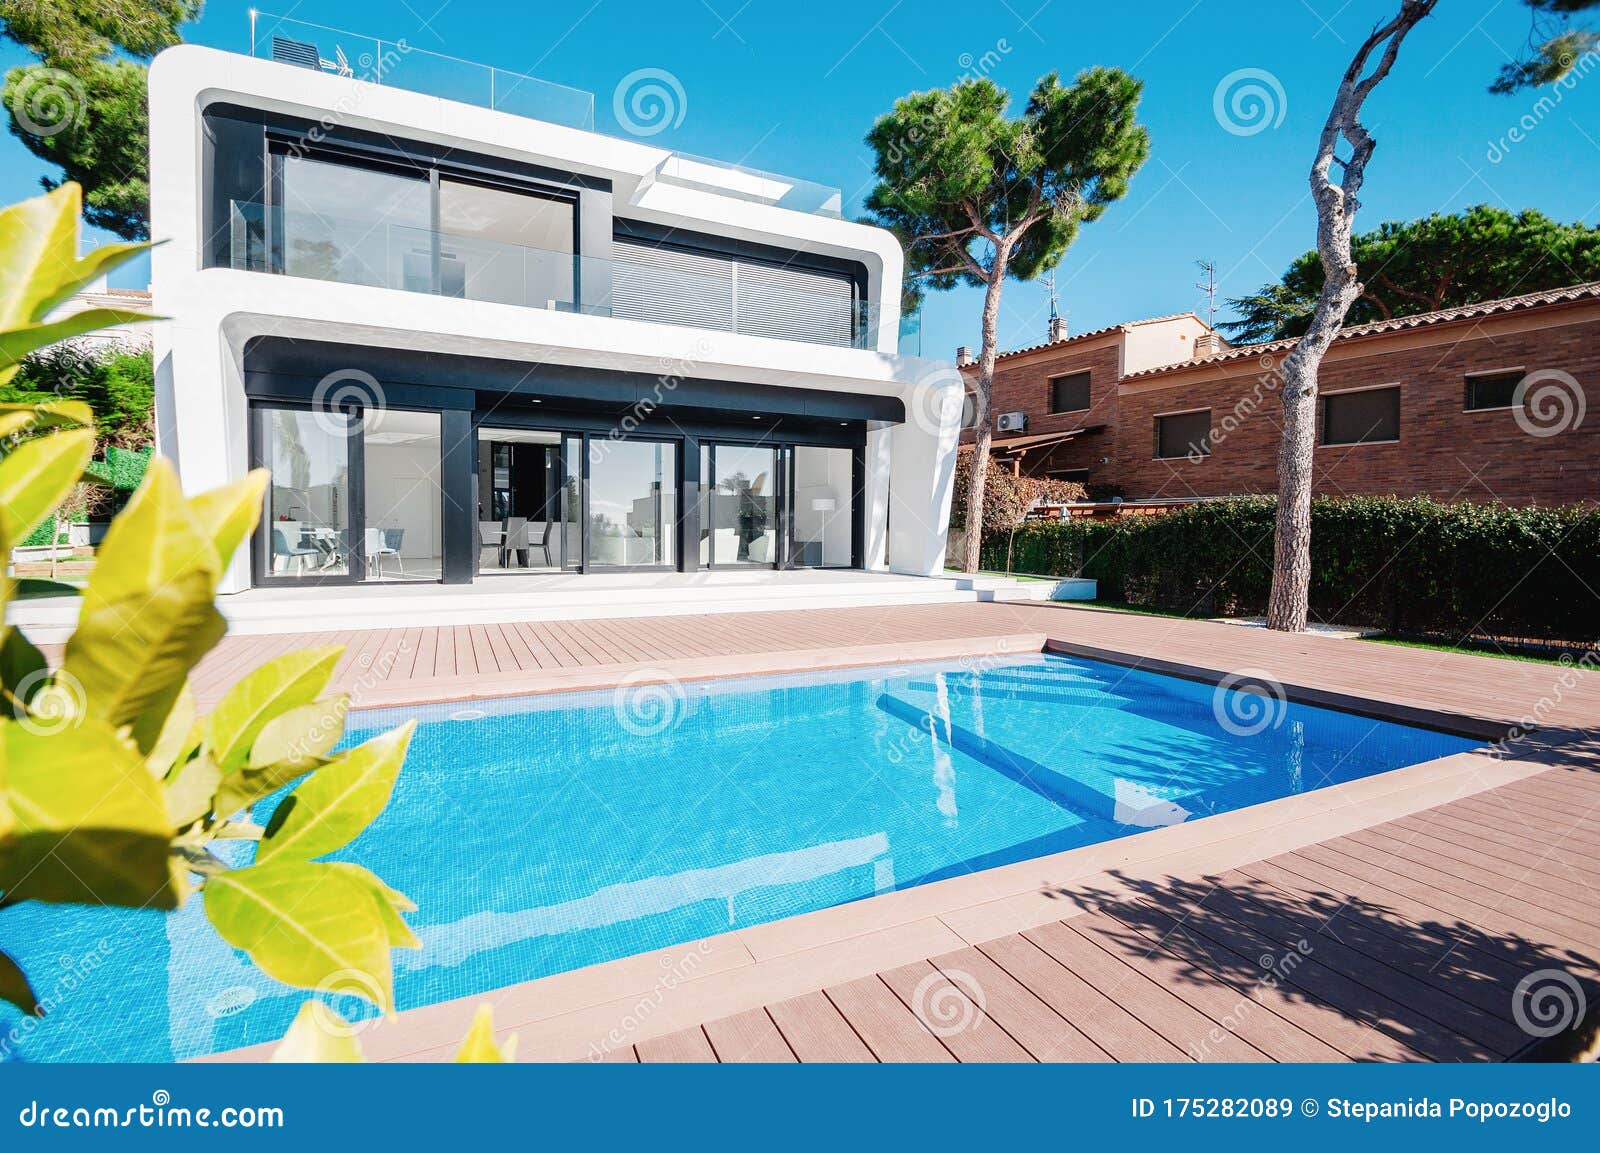 Luxury Modern White House With Large Windows Overlooking A Mediterian Landscaped Garden With Palm Trees And Blue Swimming Pool Stock Image Image Of House Contemporary 175282089